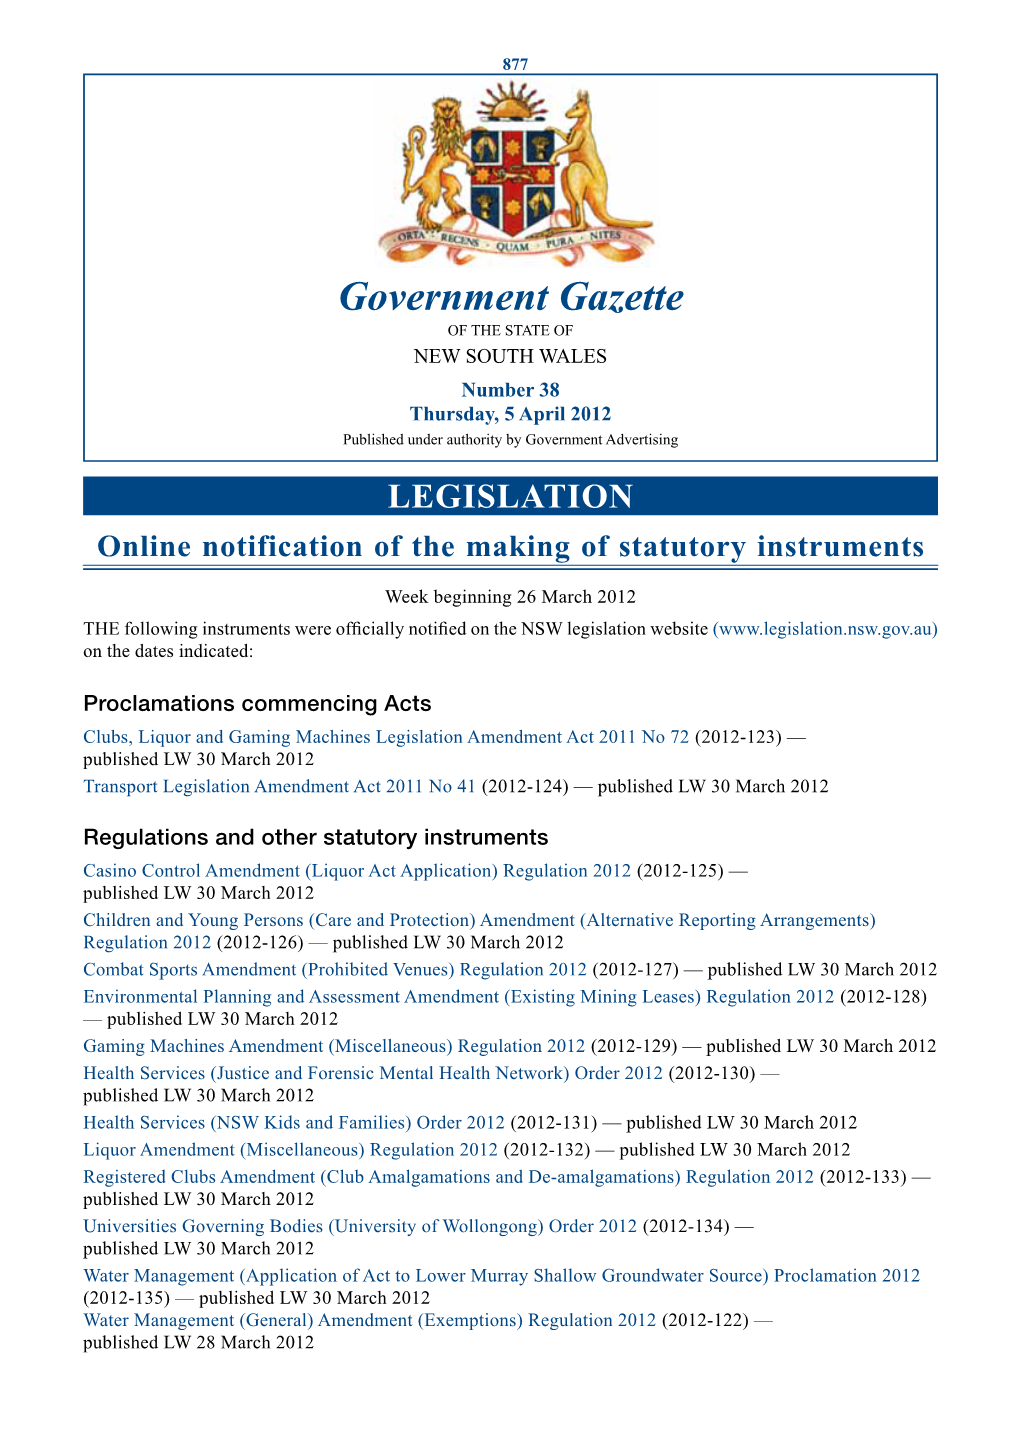 Government Gazette of the STATE of NEW SOUTH WALES Number 38 Thursday, 5 April 2012 Published Under Authority by Government Advertising